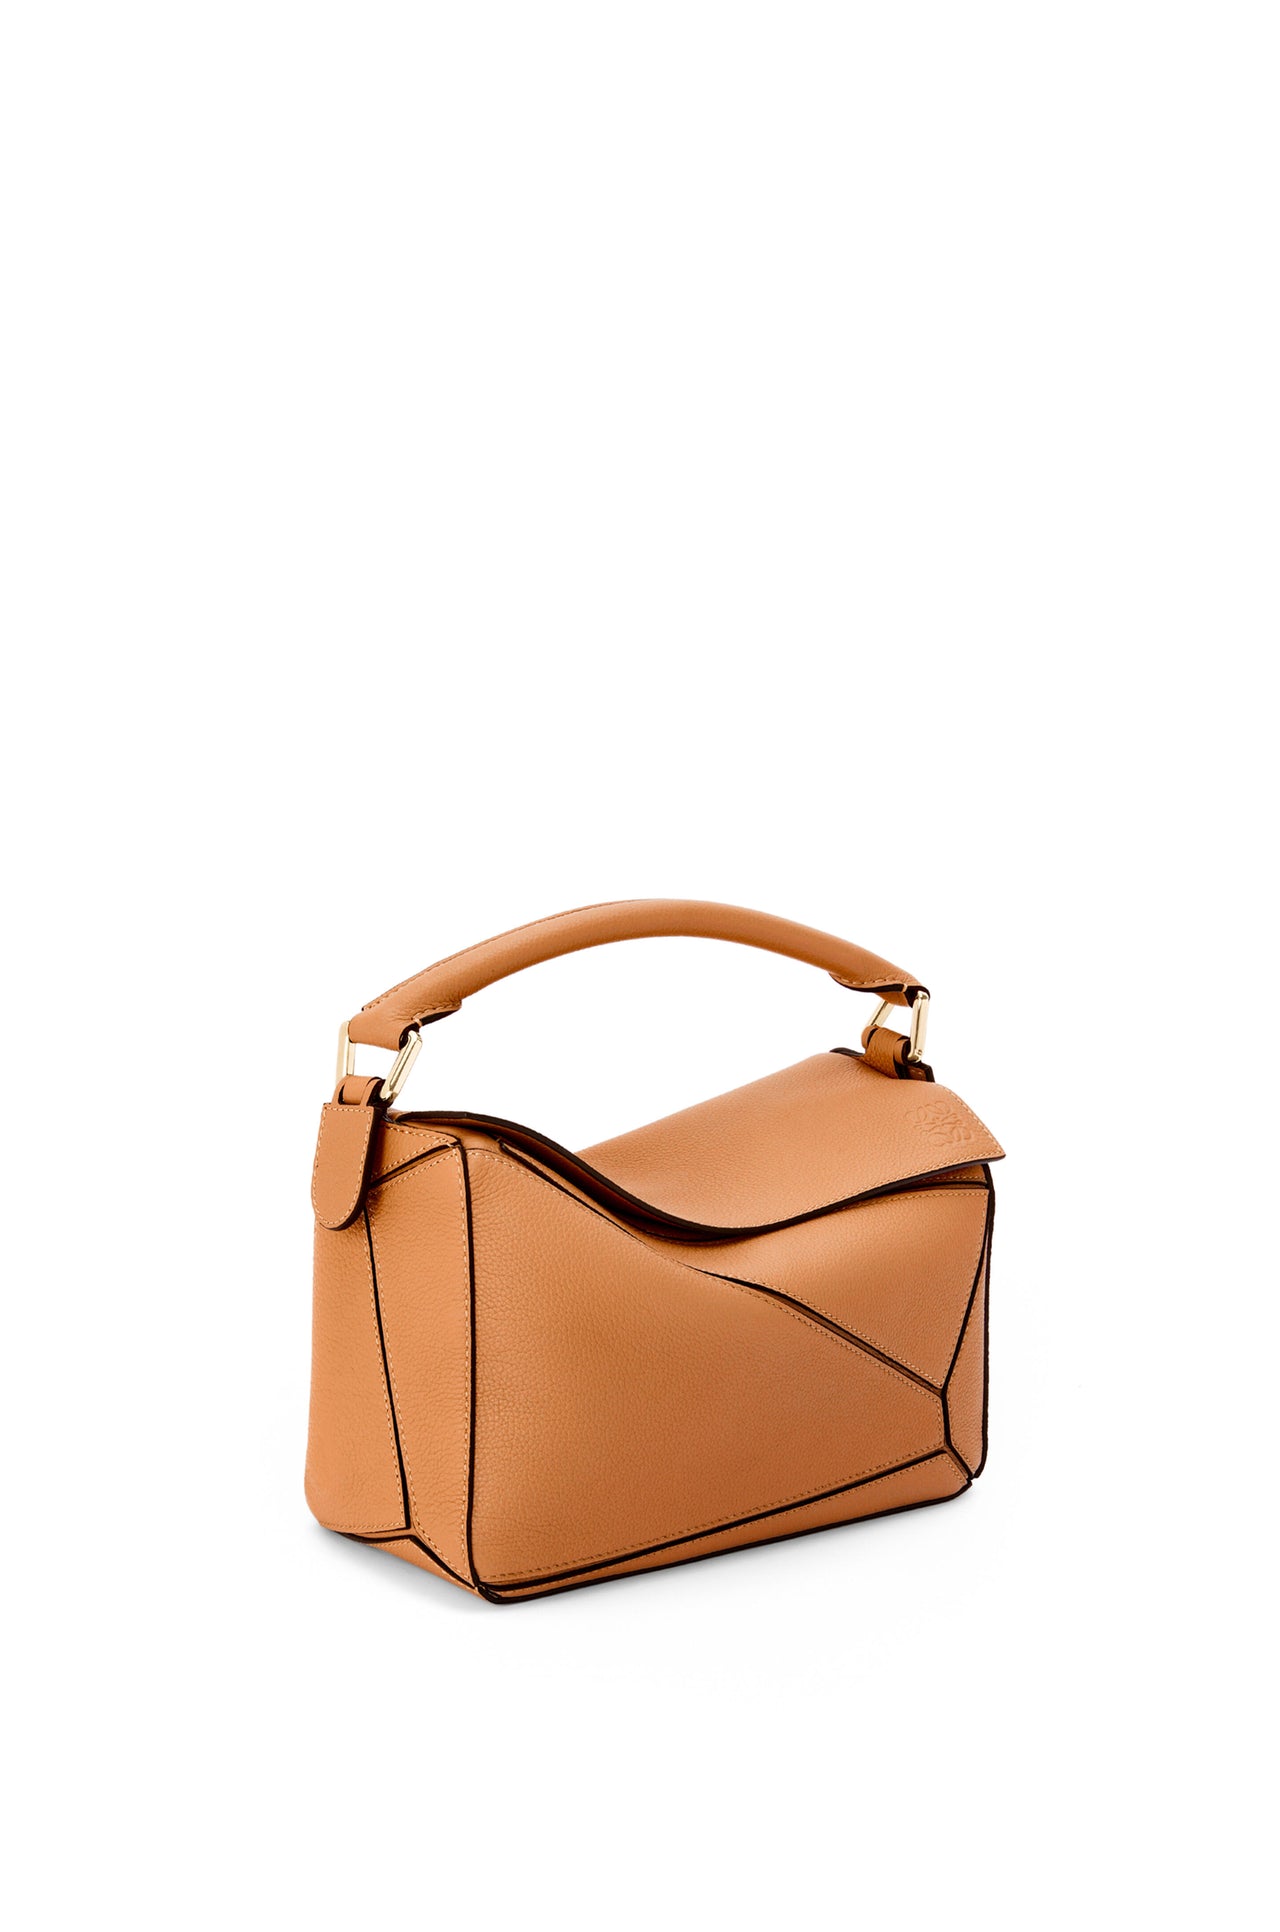 Loewe Small Puzzle bag in soft grained calfskin (Light Caramel)